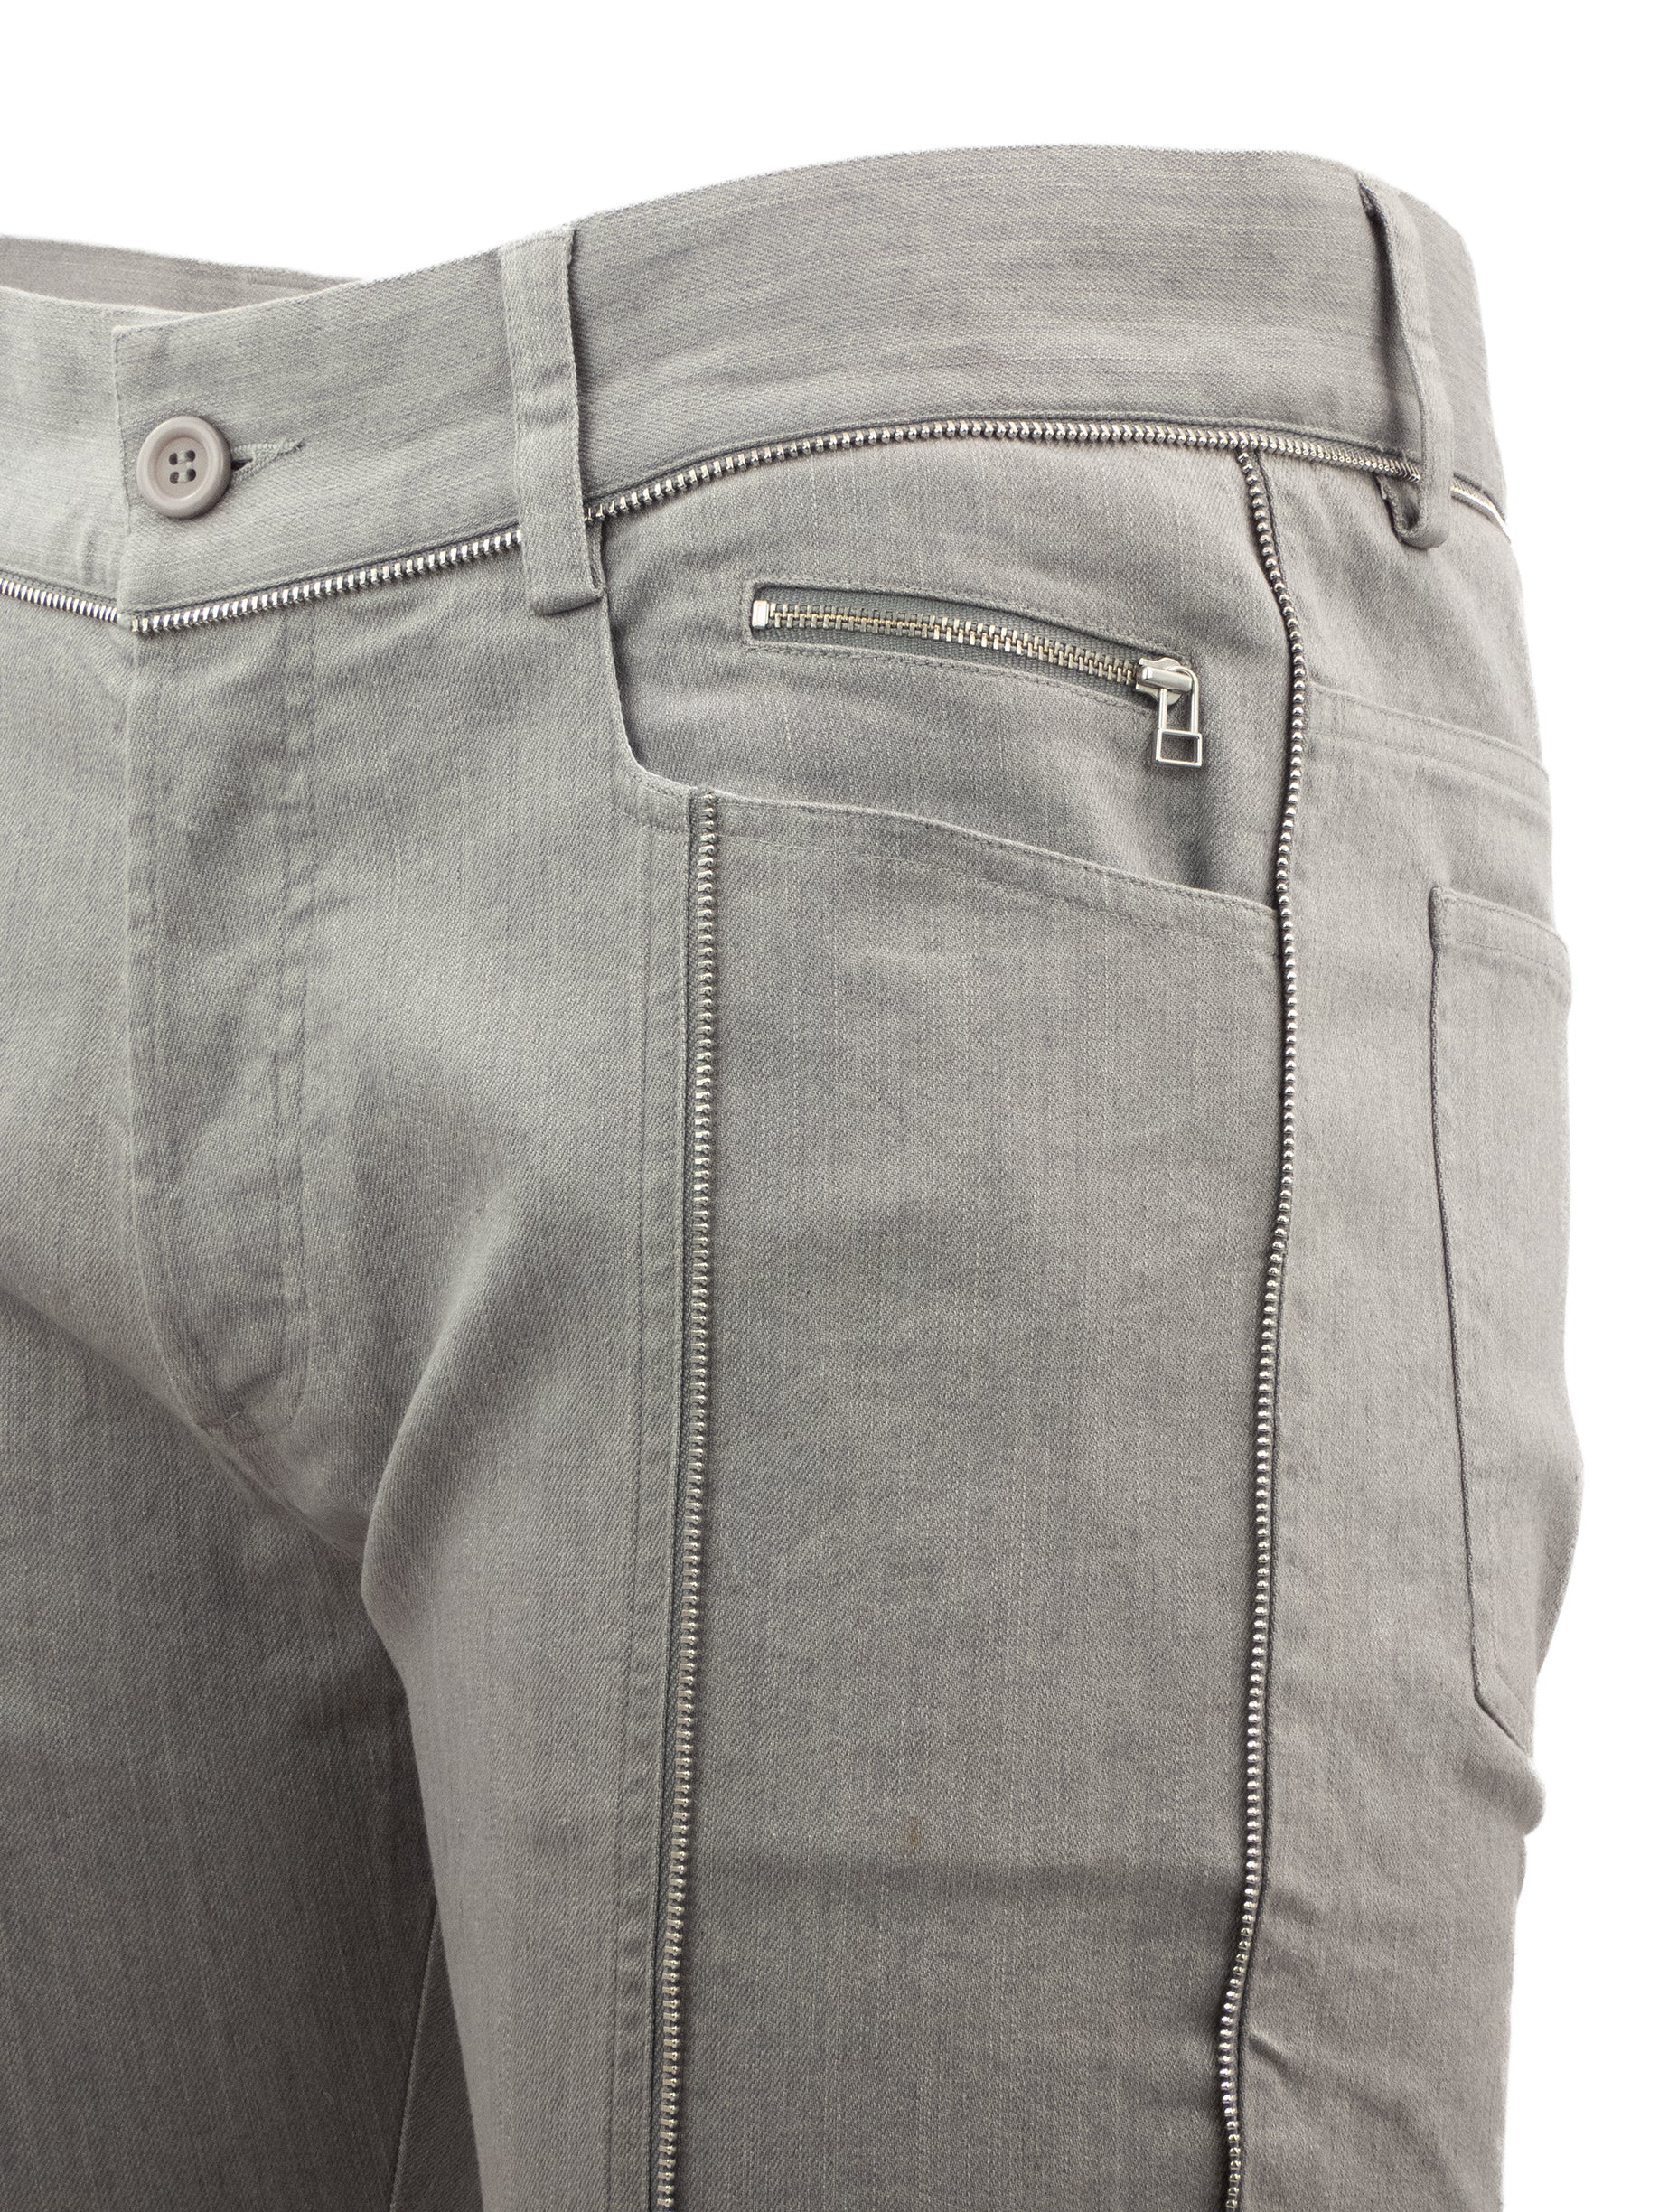 LIGHT GREY JEANS WITH SILVER ZIPS